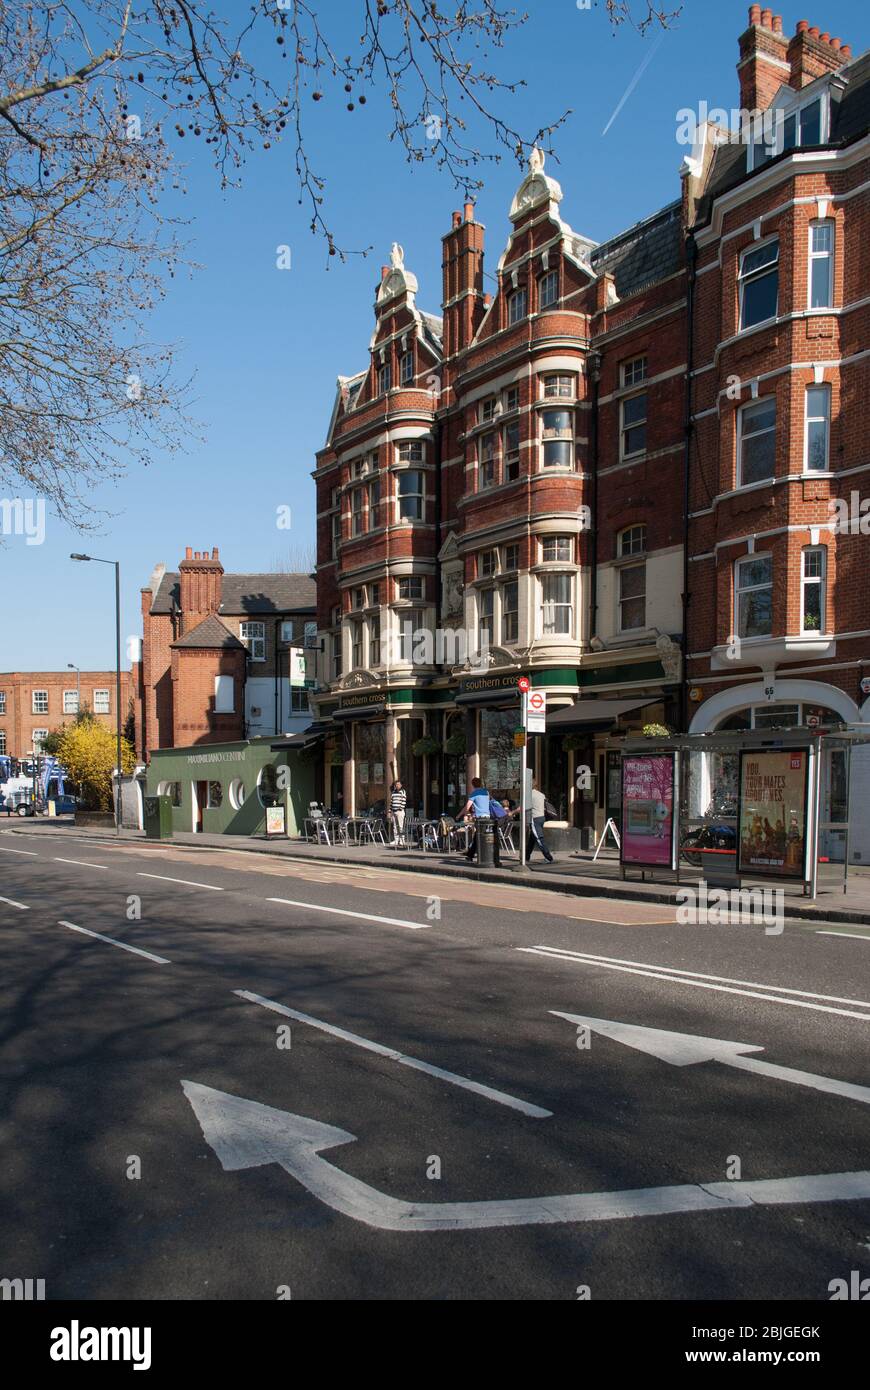 Southern Cross, 65 New King's Rd, Fulham, London SW6 4SG Stockfoto